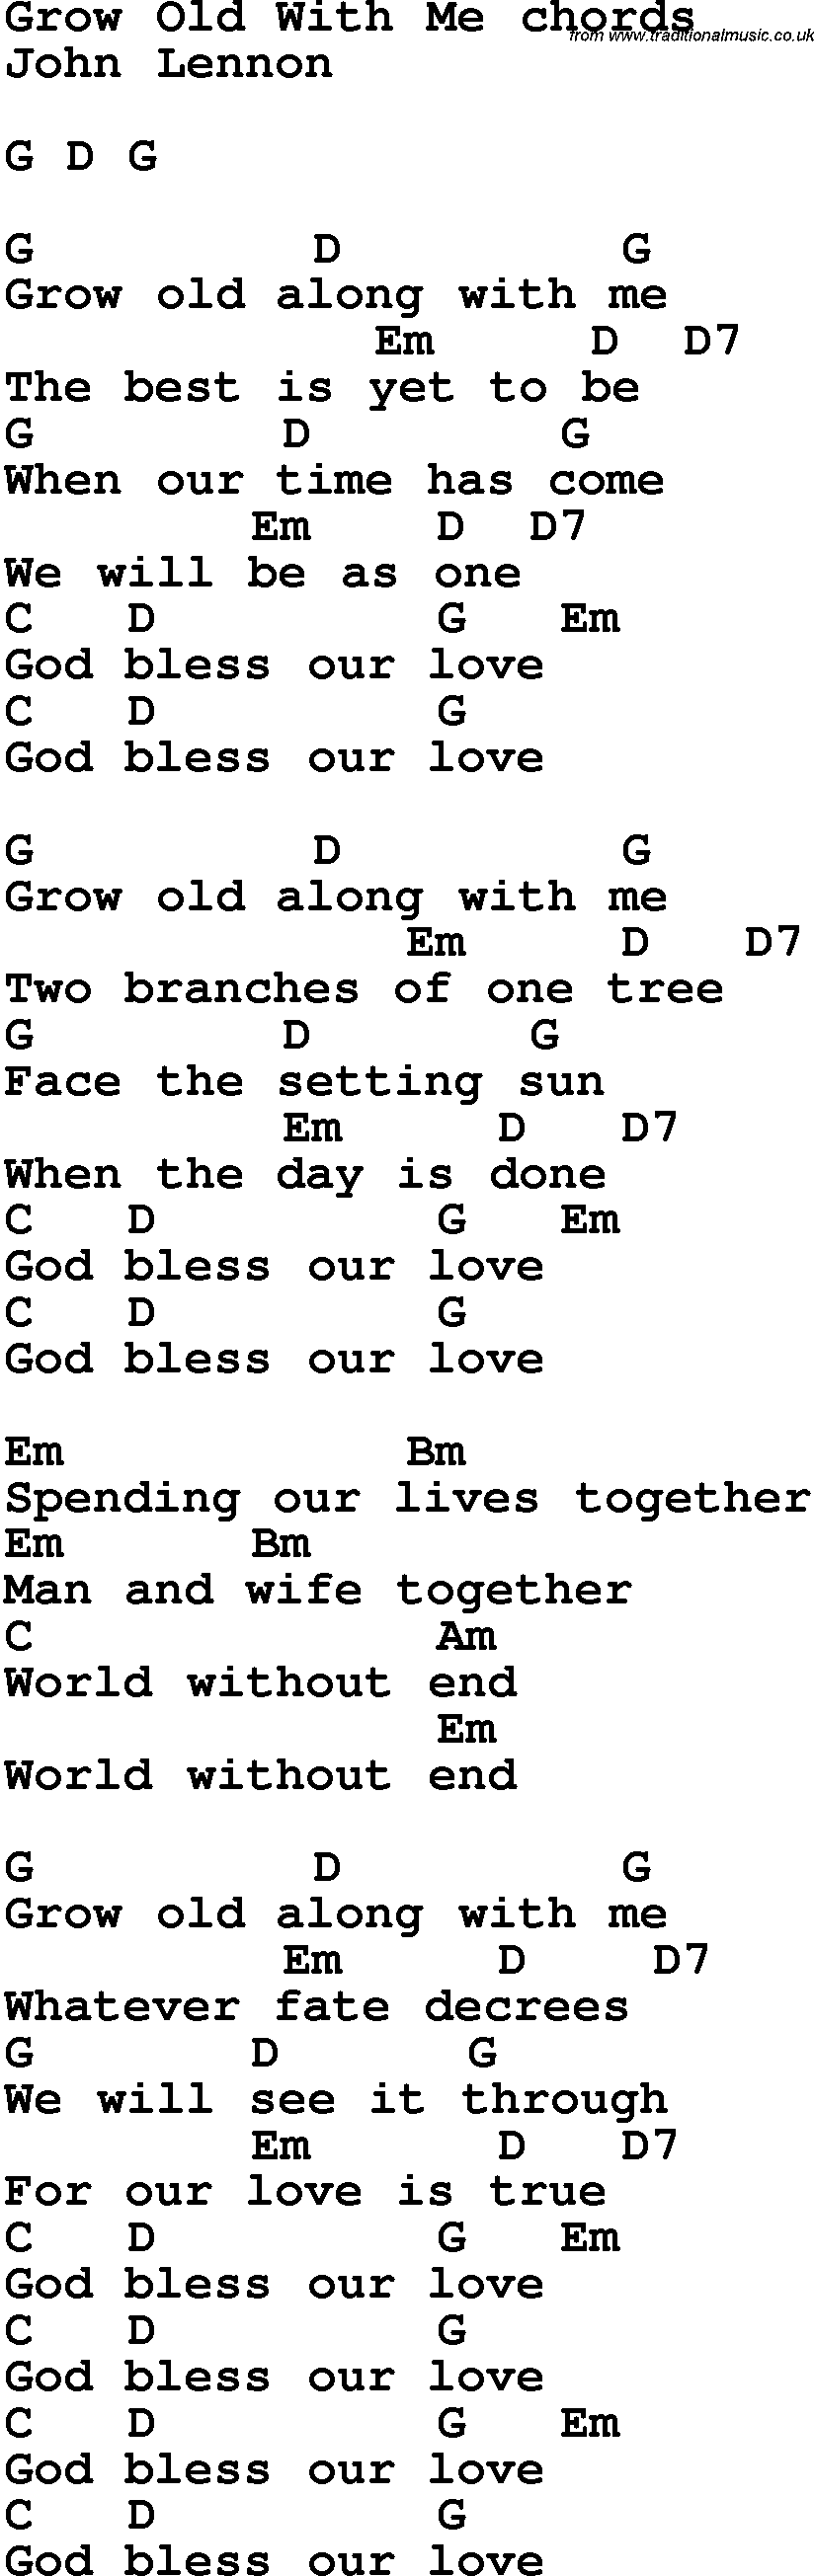 Song Lyrics with guitar chords for Grow Old With Me